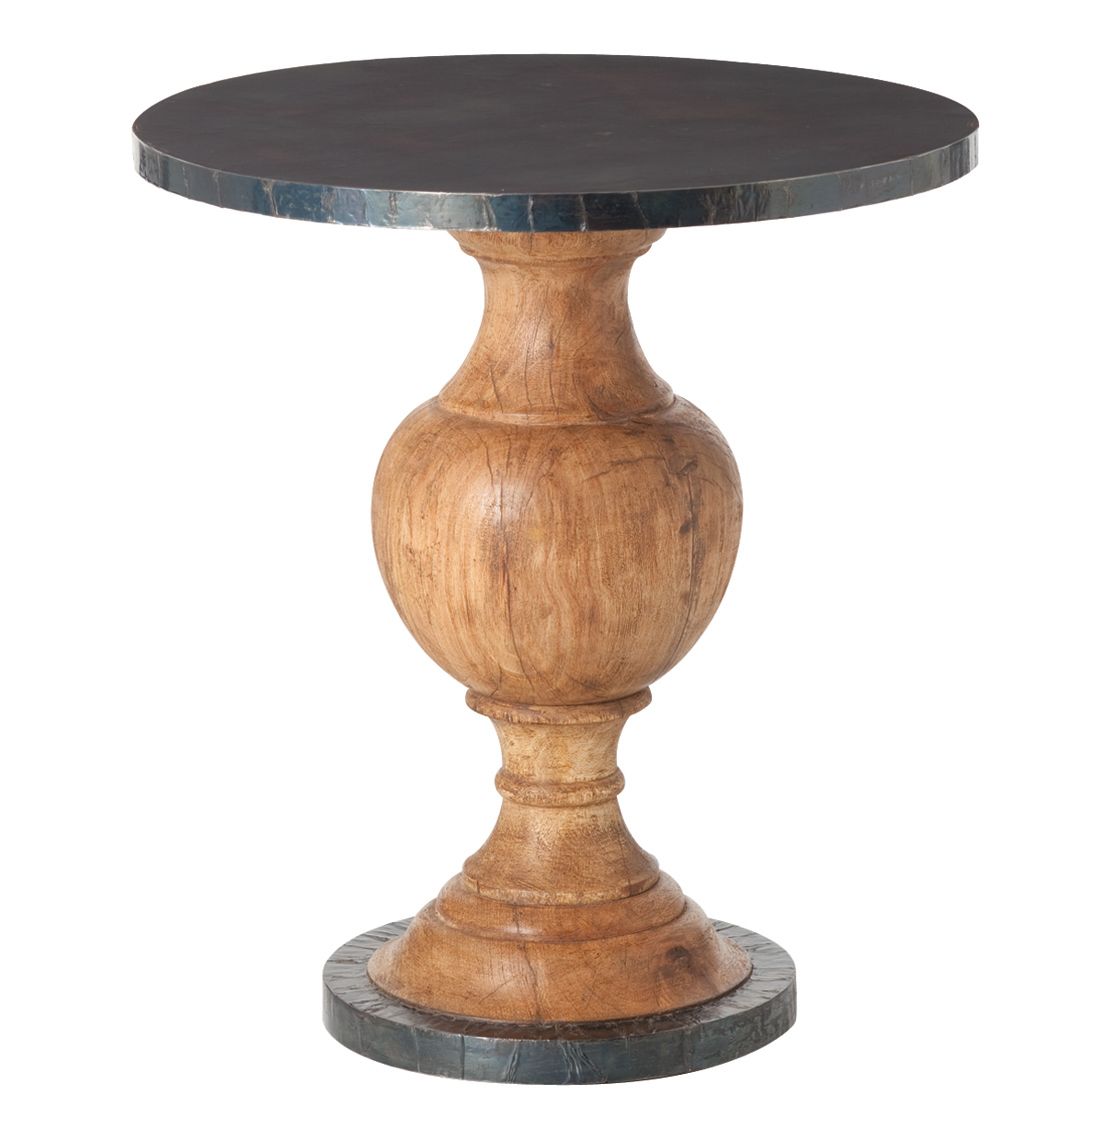 accent wooden wood roundhill side white rene deen tall small table large paula round furniture awesome black home antique distressed pedestal diy full size grey lamps danish